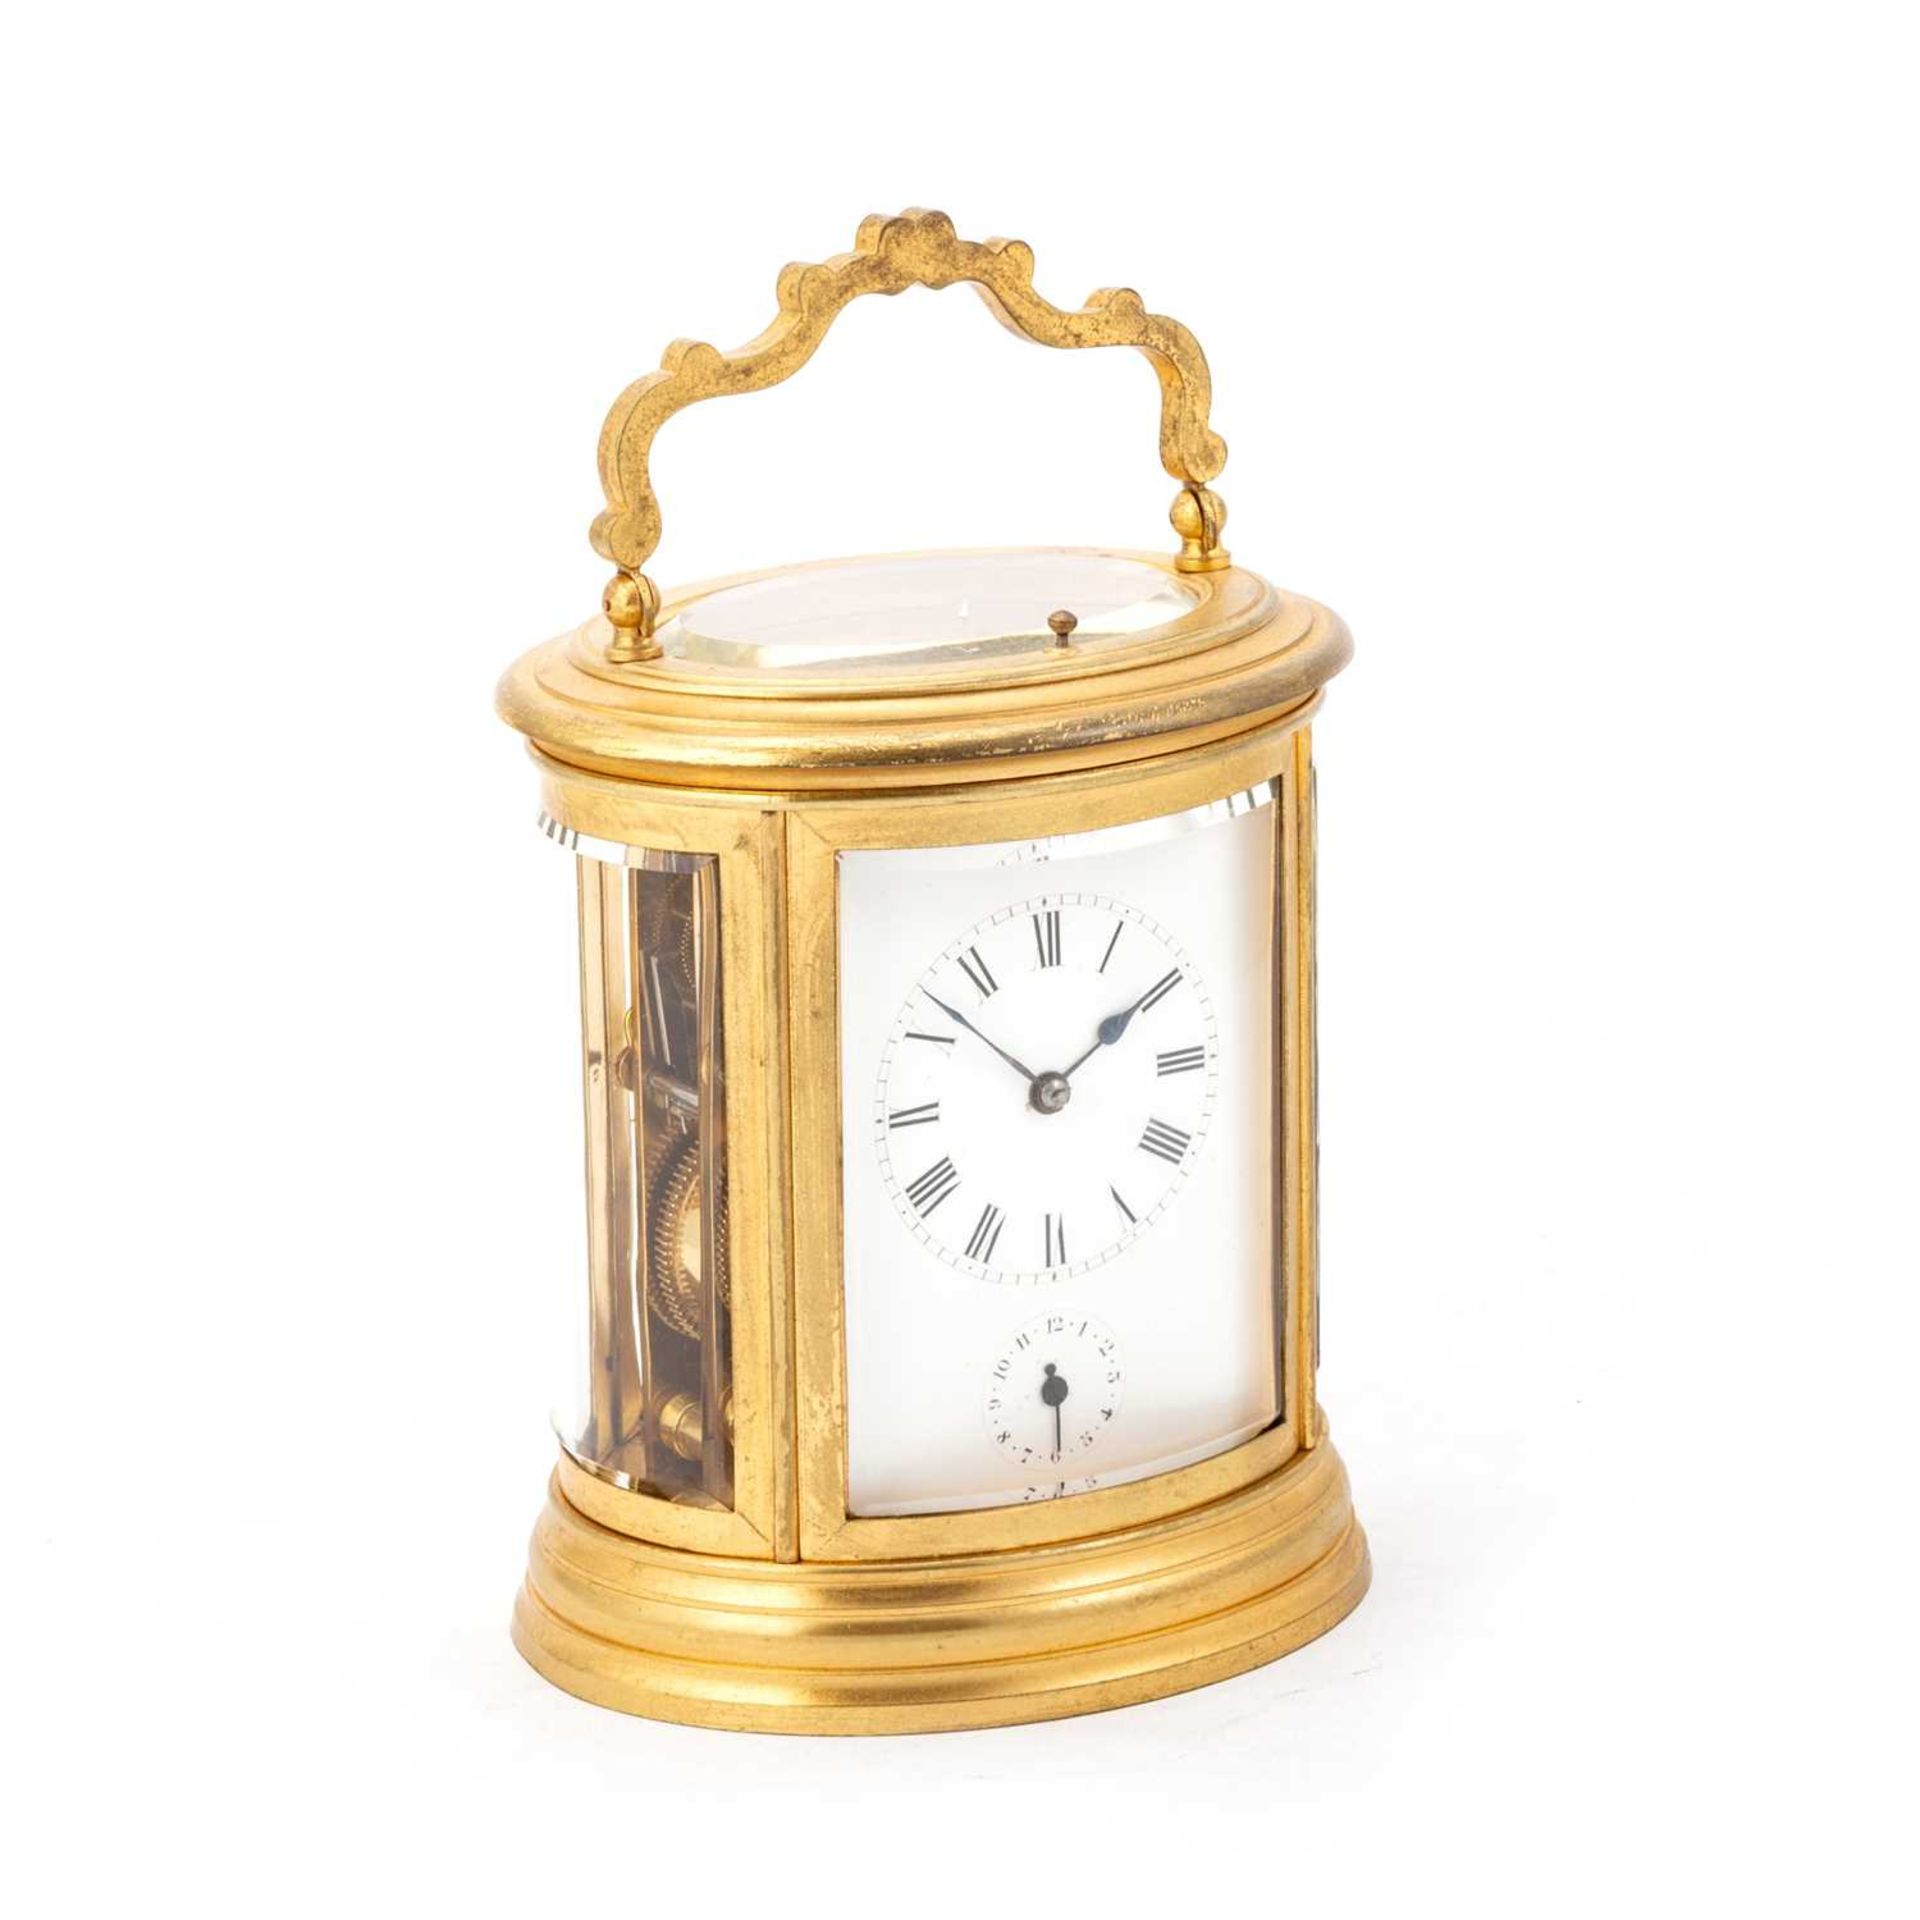 A 19TH CENTURY FRENCH BRASS-CASED REPEATING CARRIAGE CLOCK